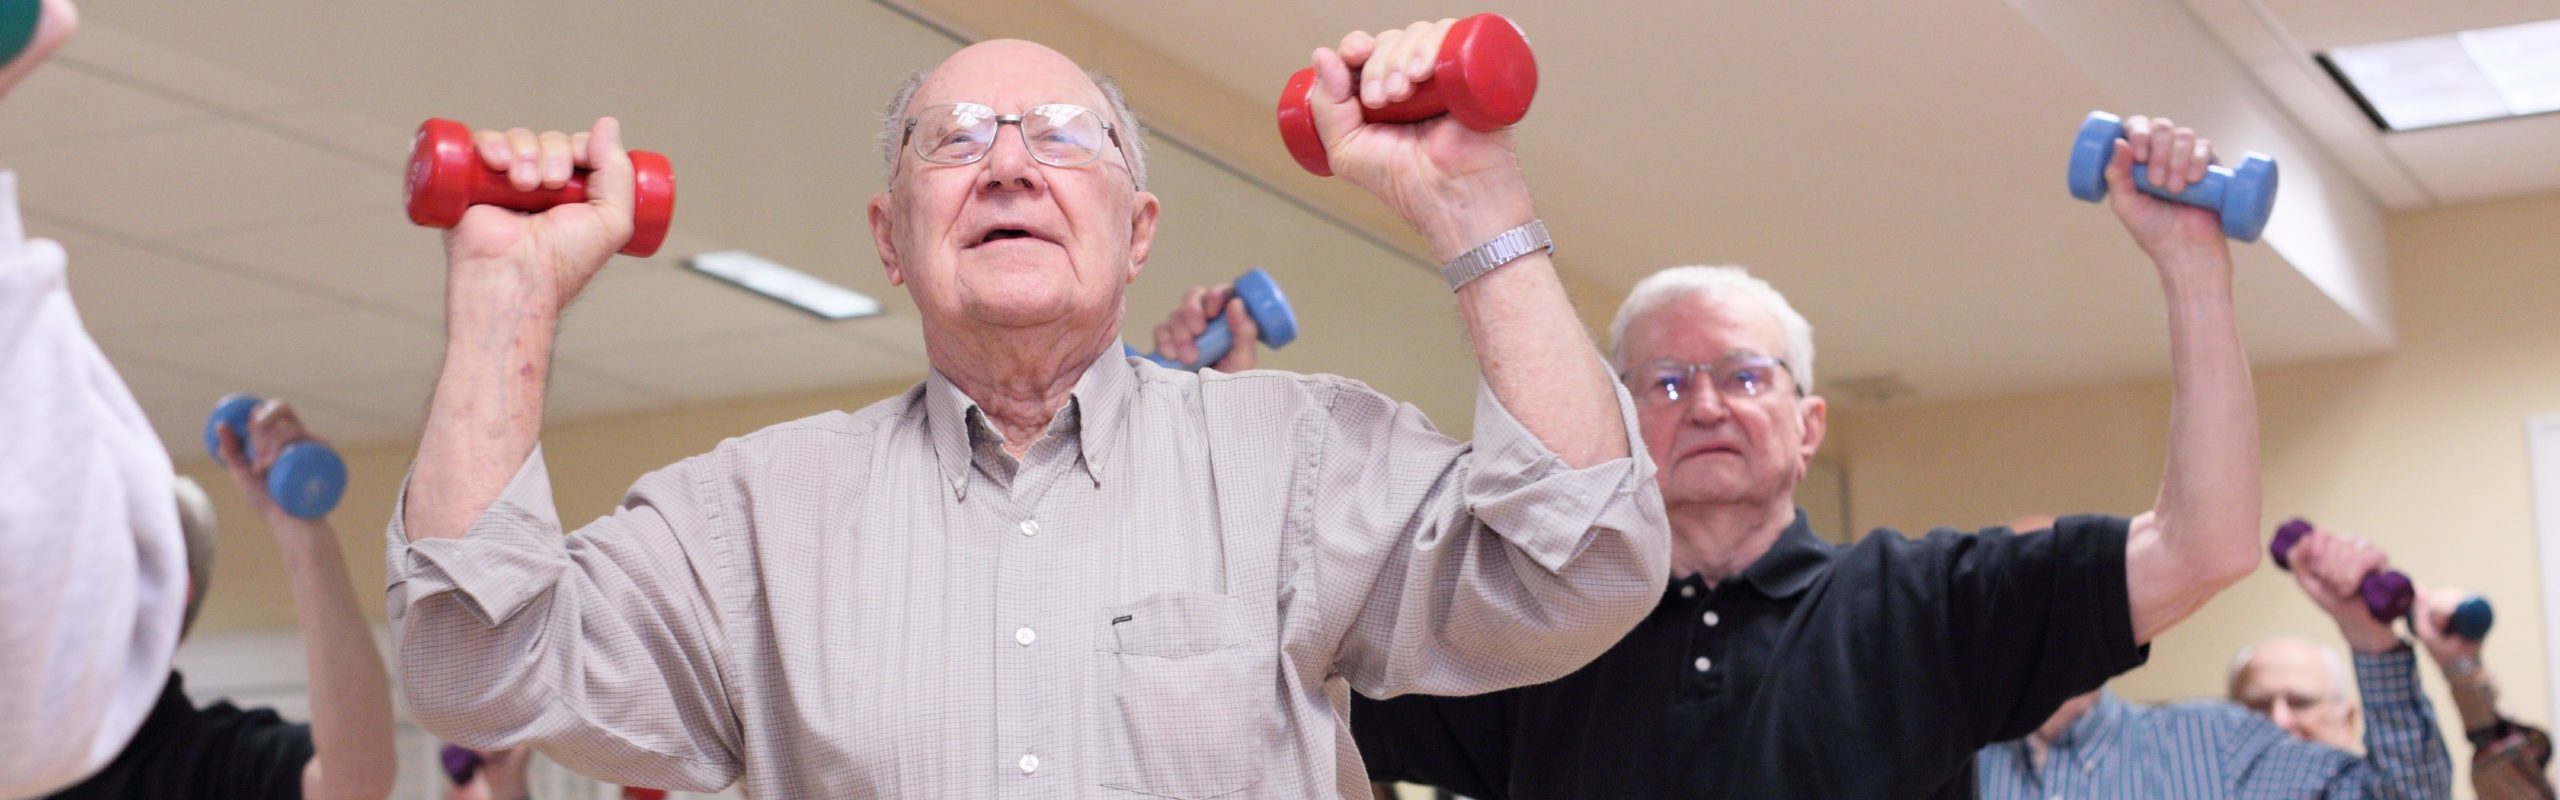 Brio Living Services, Residents Lifting Weights in Aerobics Class